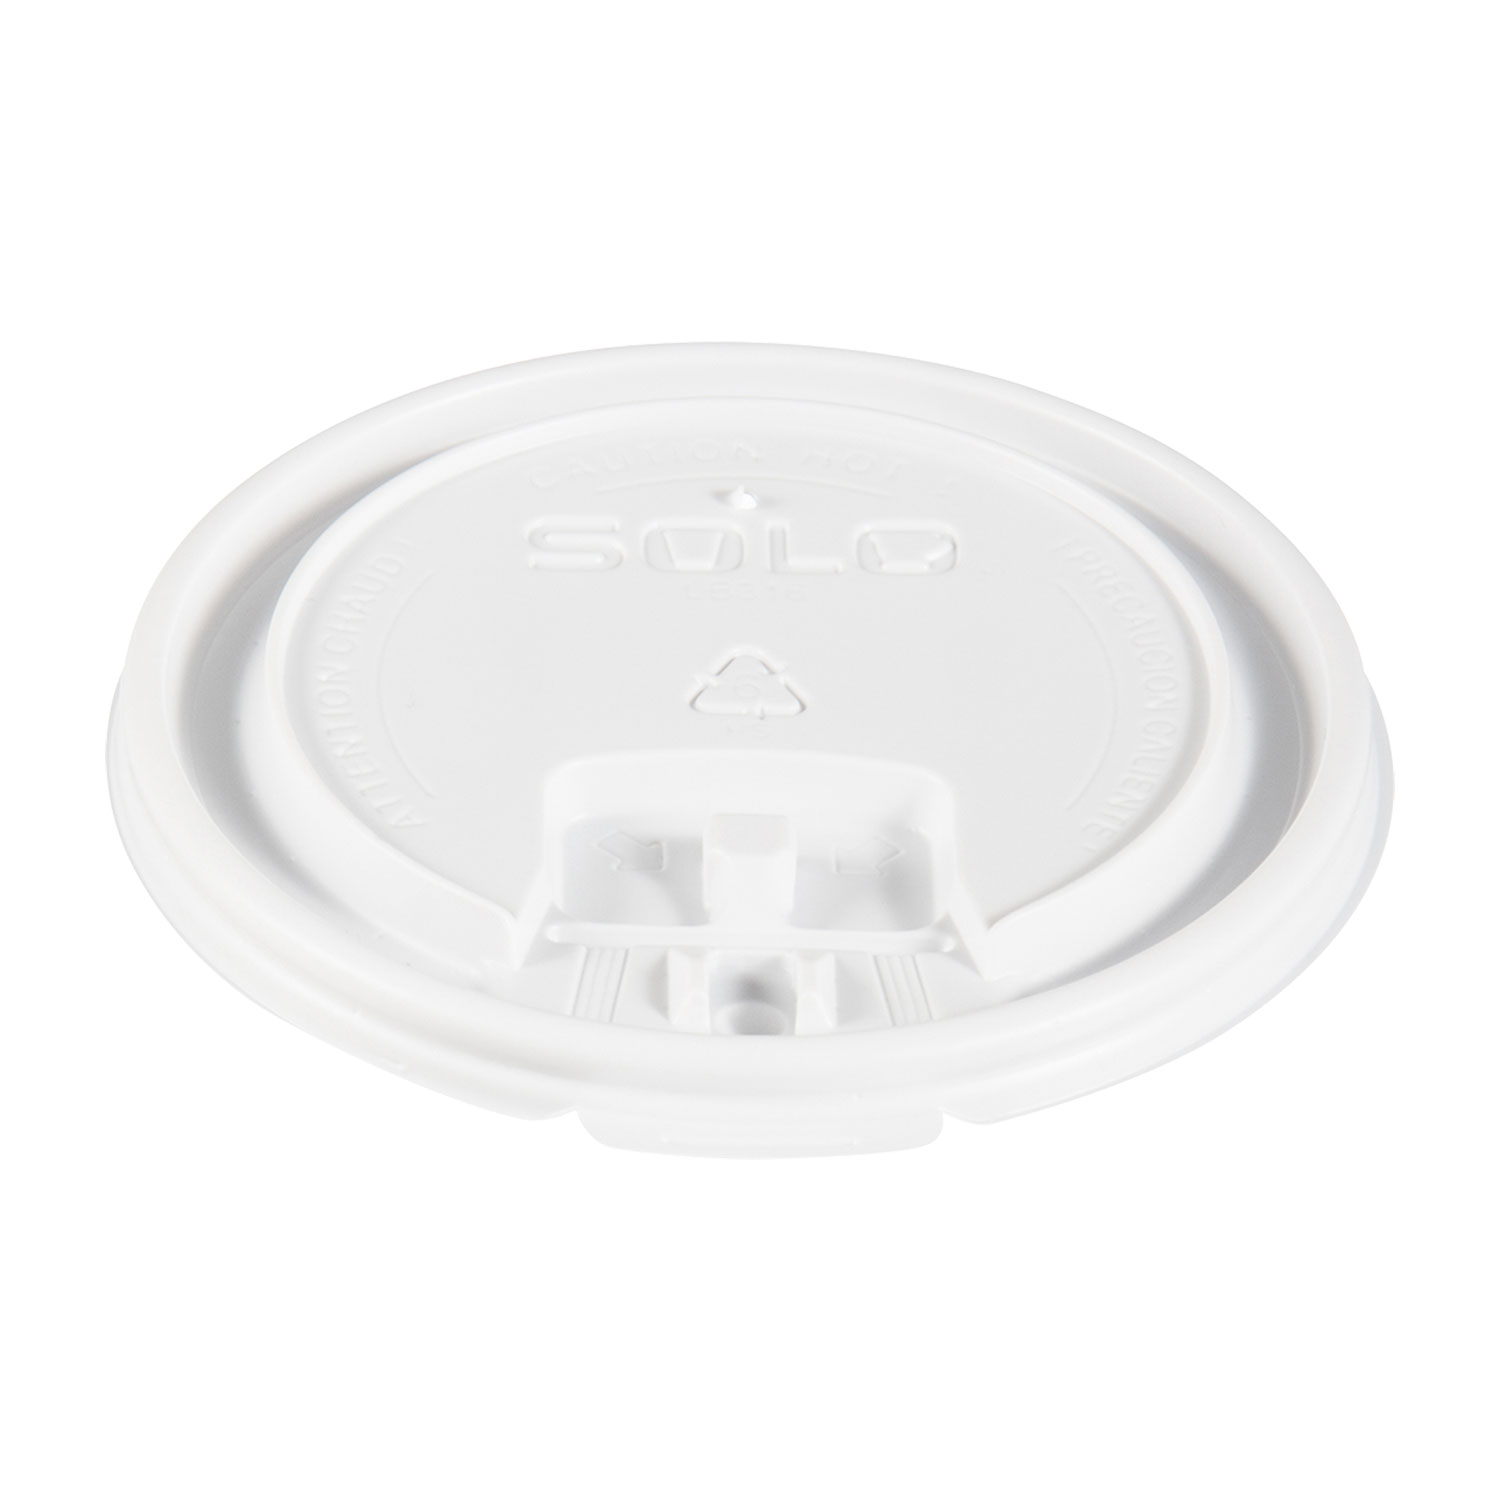  Dart LB3161-00007 Lift Back and Lock Tab Cup Lids, 10-24 oz Cups, White, 100/Sleeve, 10 Sleeves/Carton (SCCLB3161) 